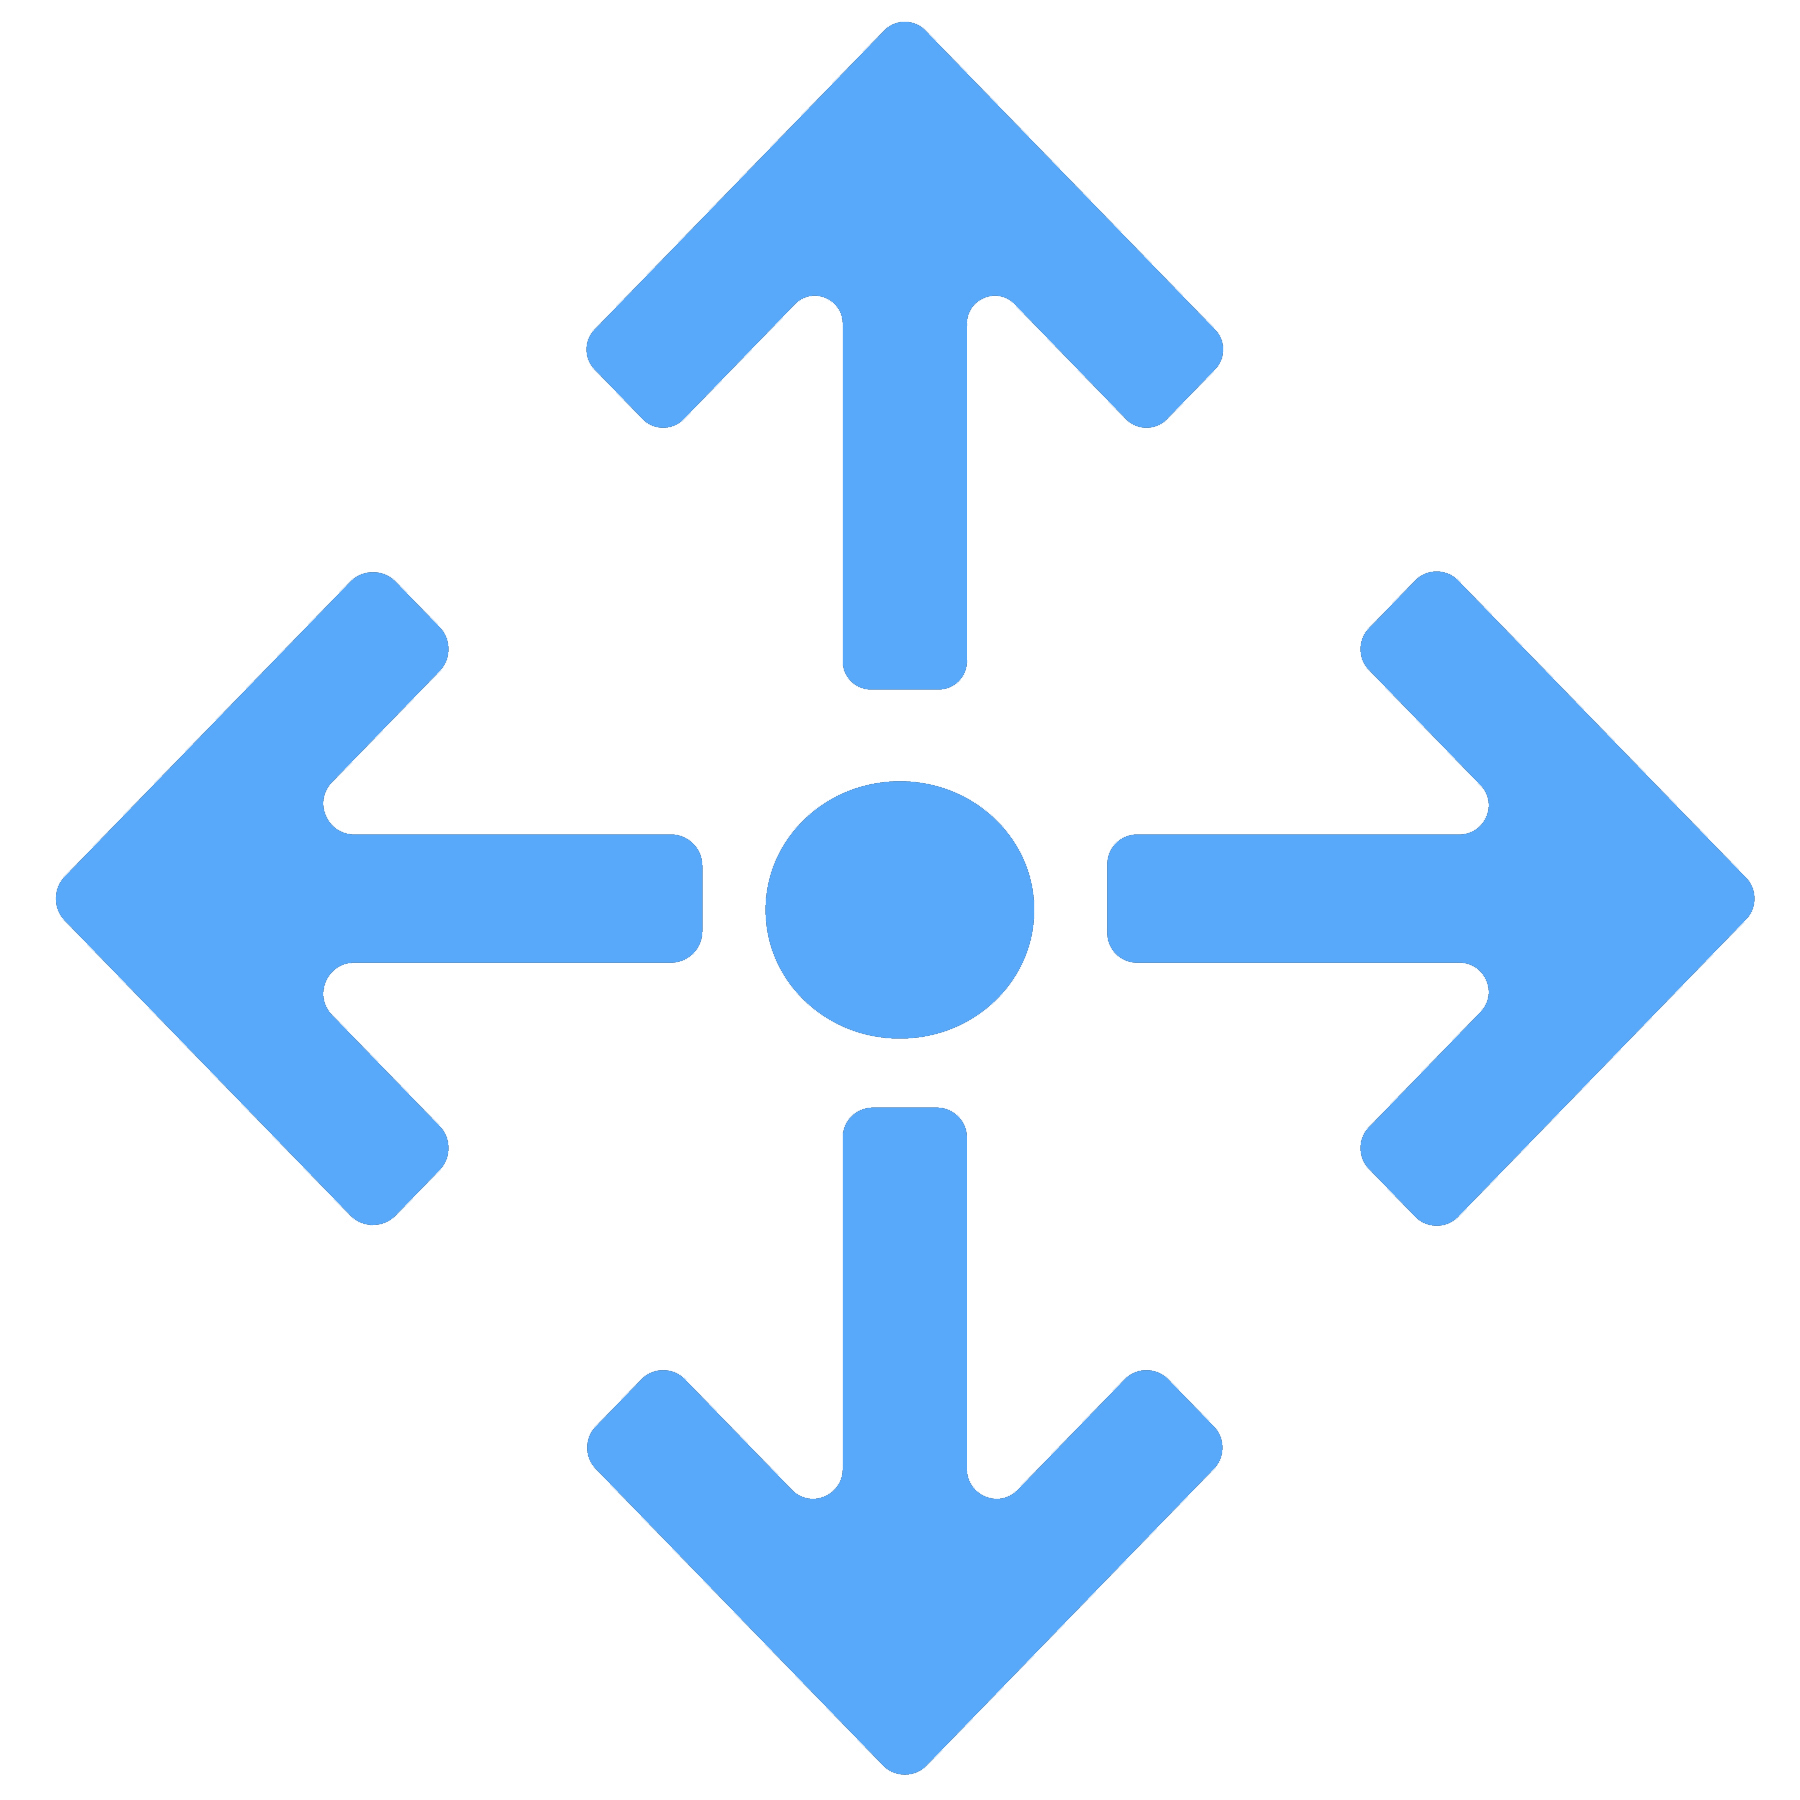 directional arrows icon to denote expansion content